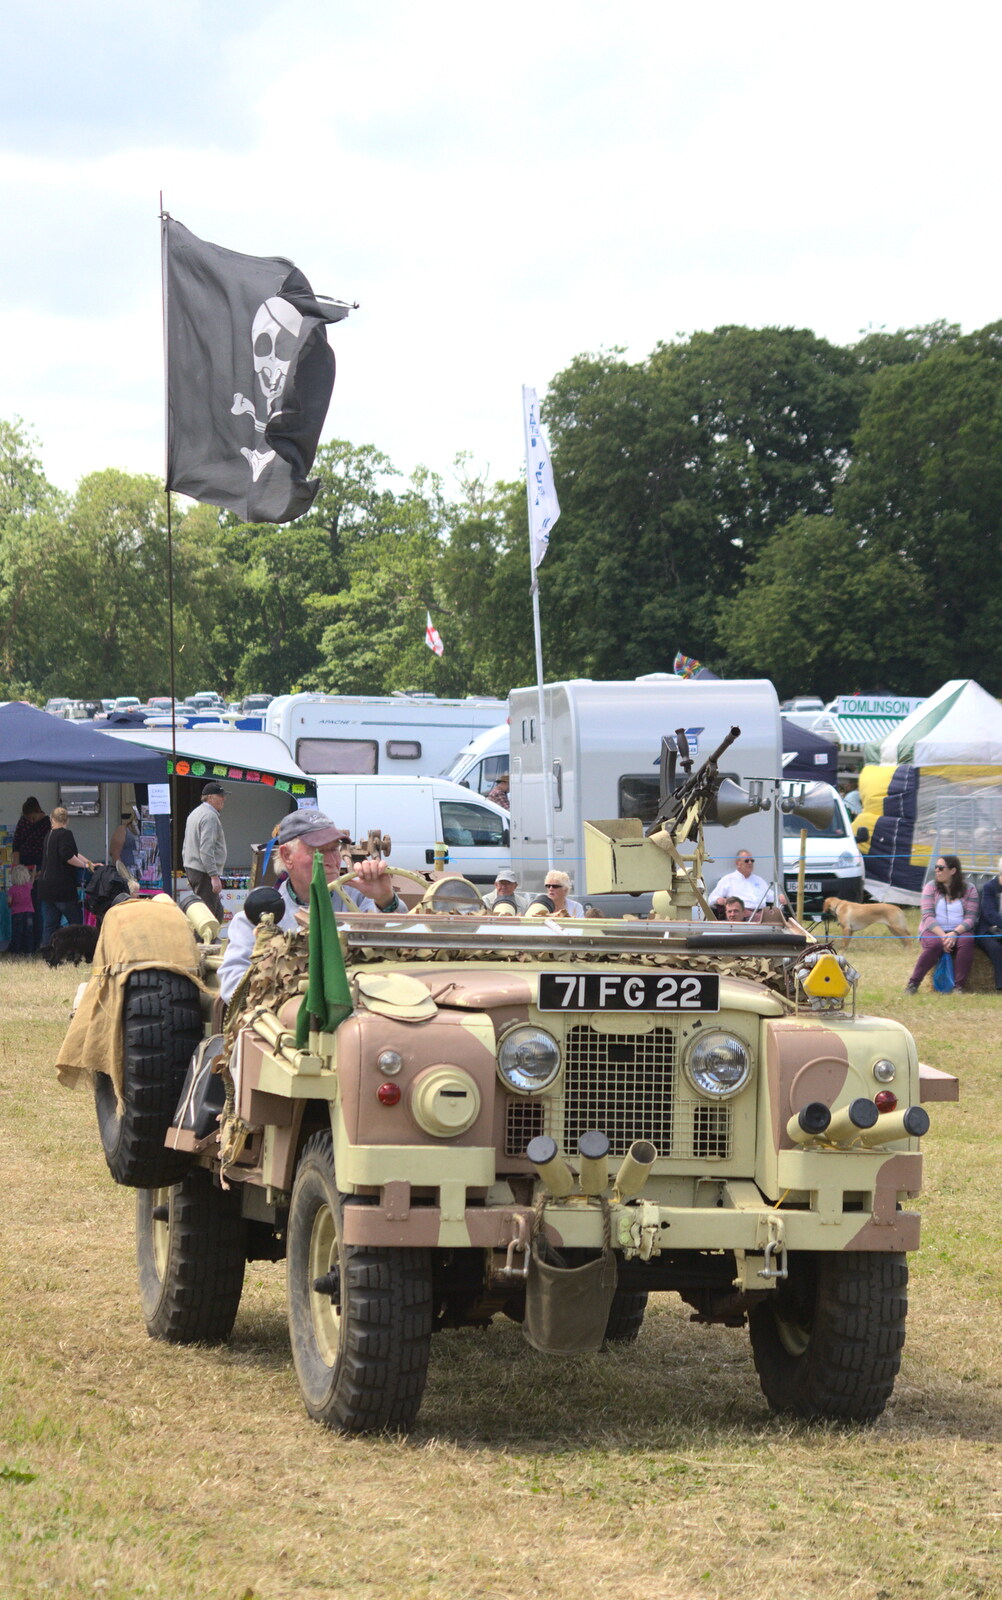 An army Land Rover with a pirate flag from A Vintage Tractorey Sort of Day, Palgrave, Suffolk - 21st June 2015